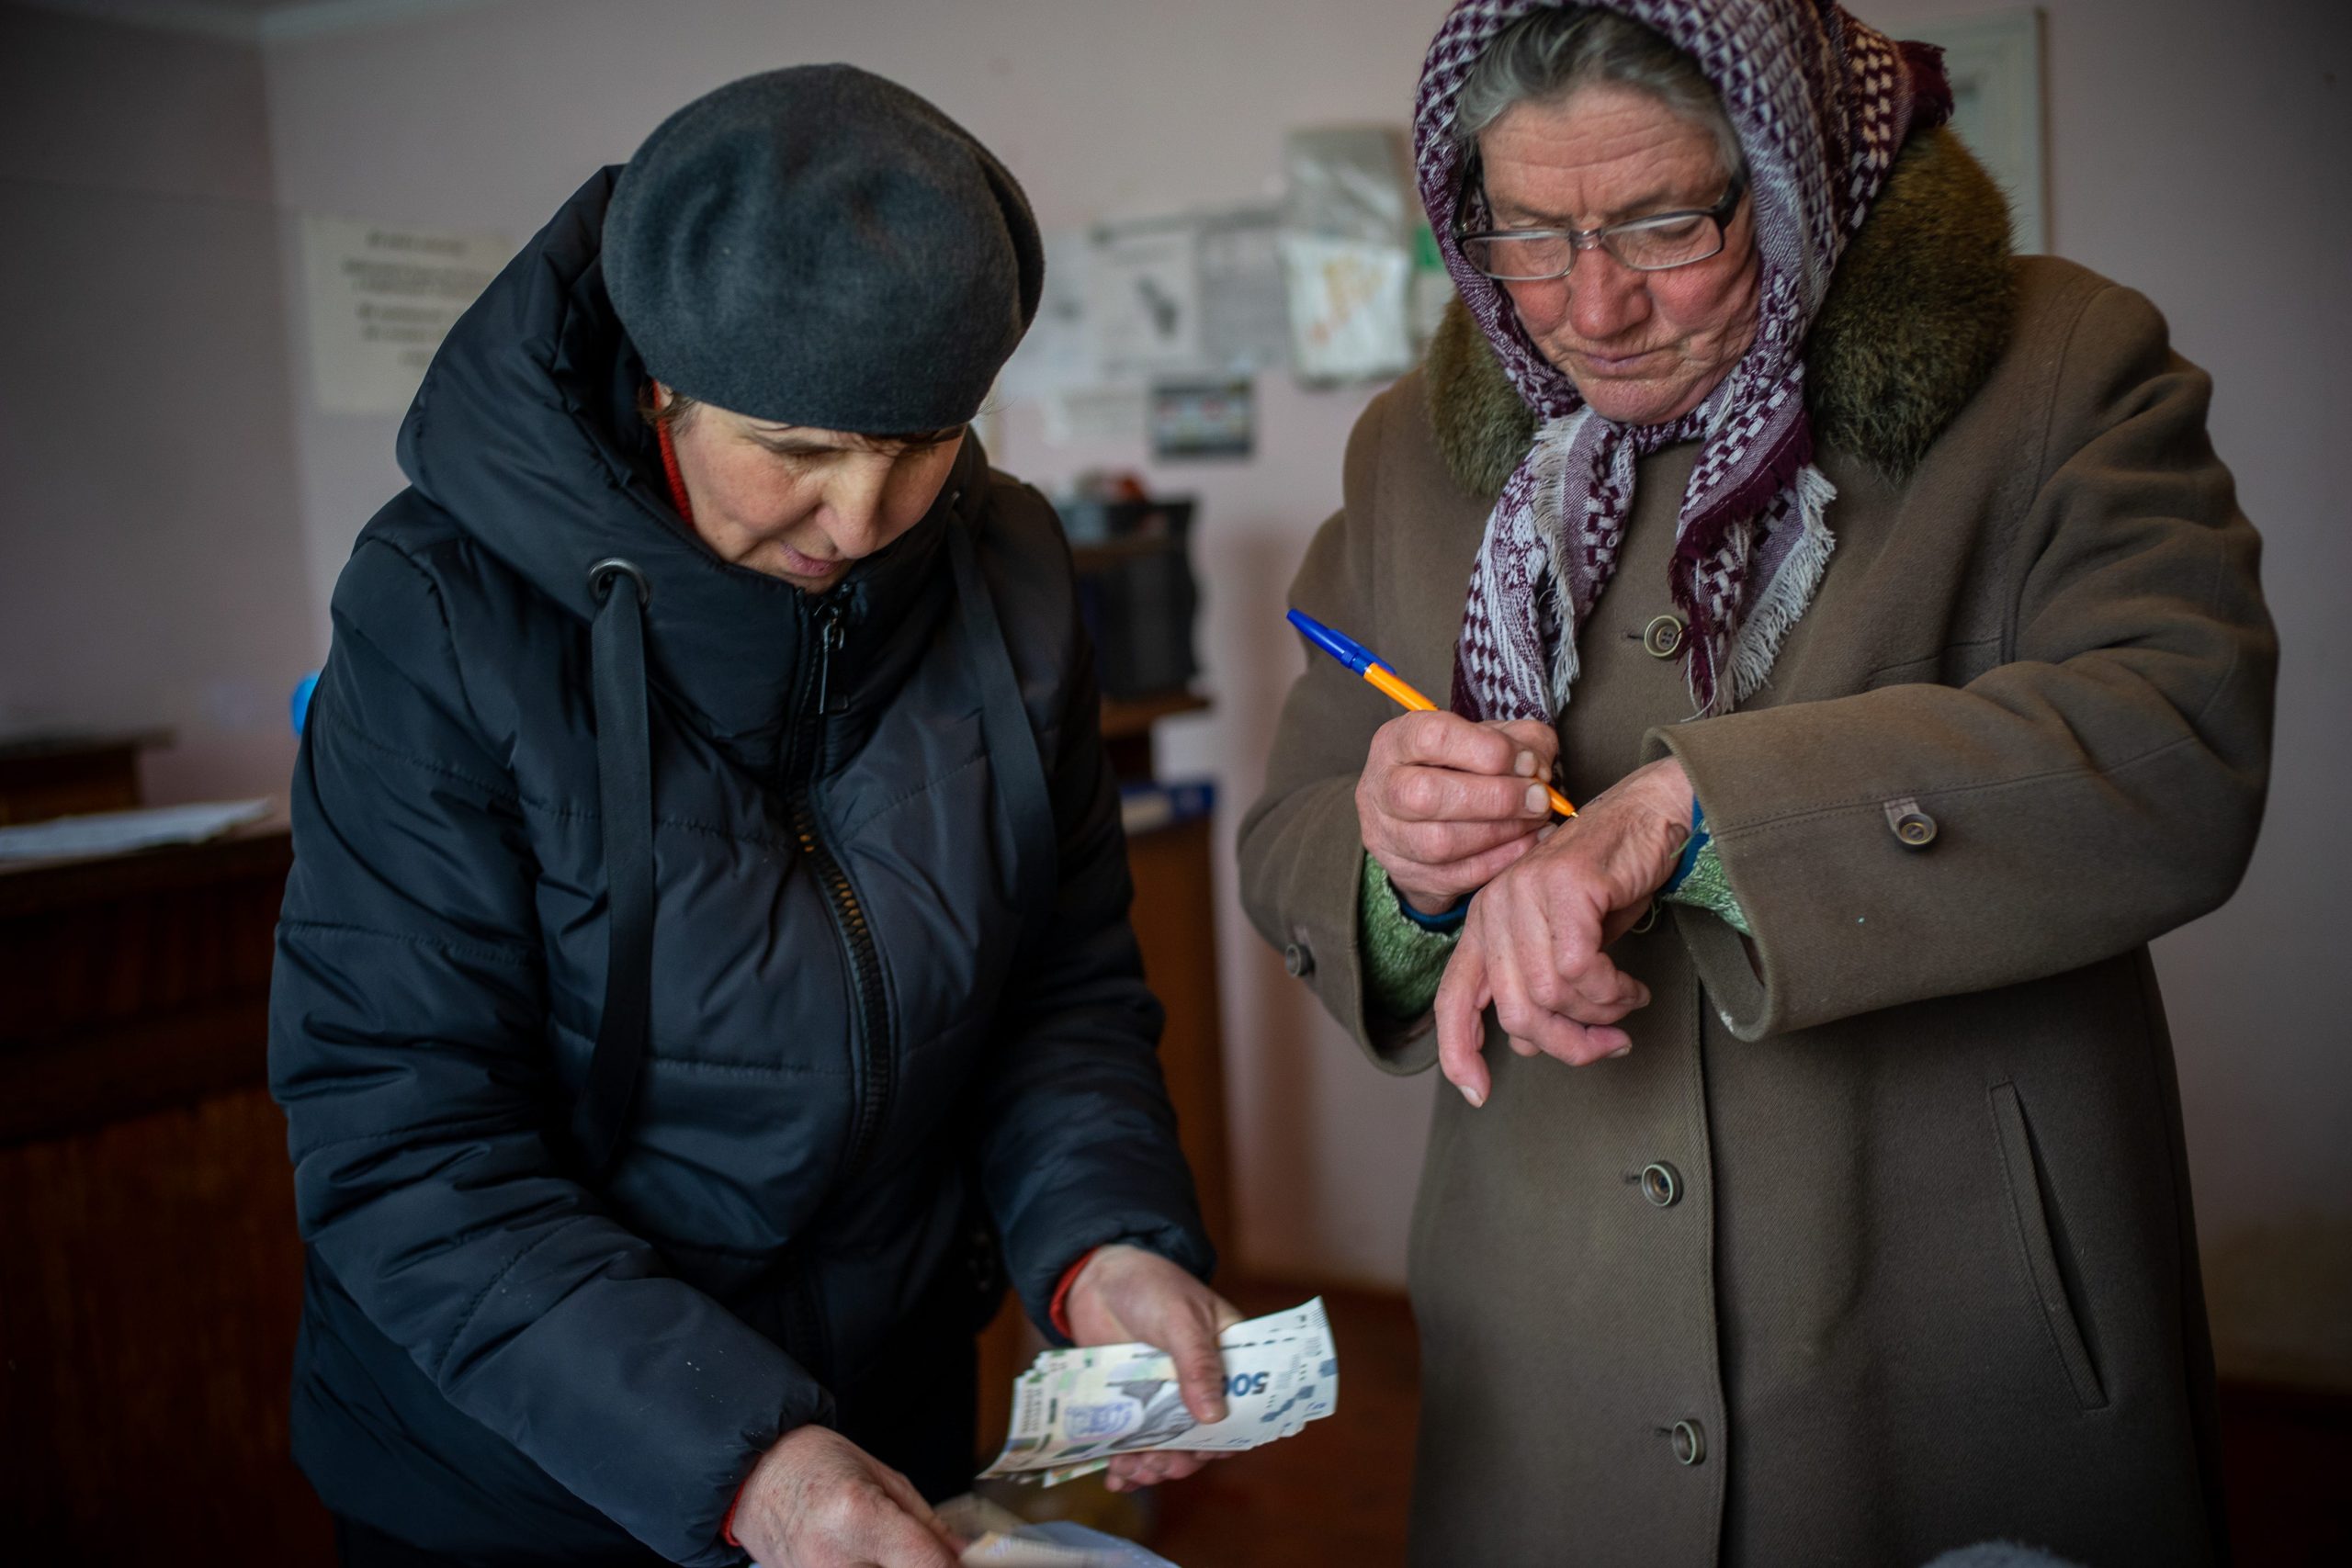 Two women sort and calculate money.